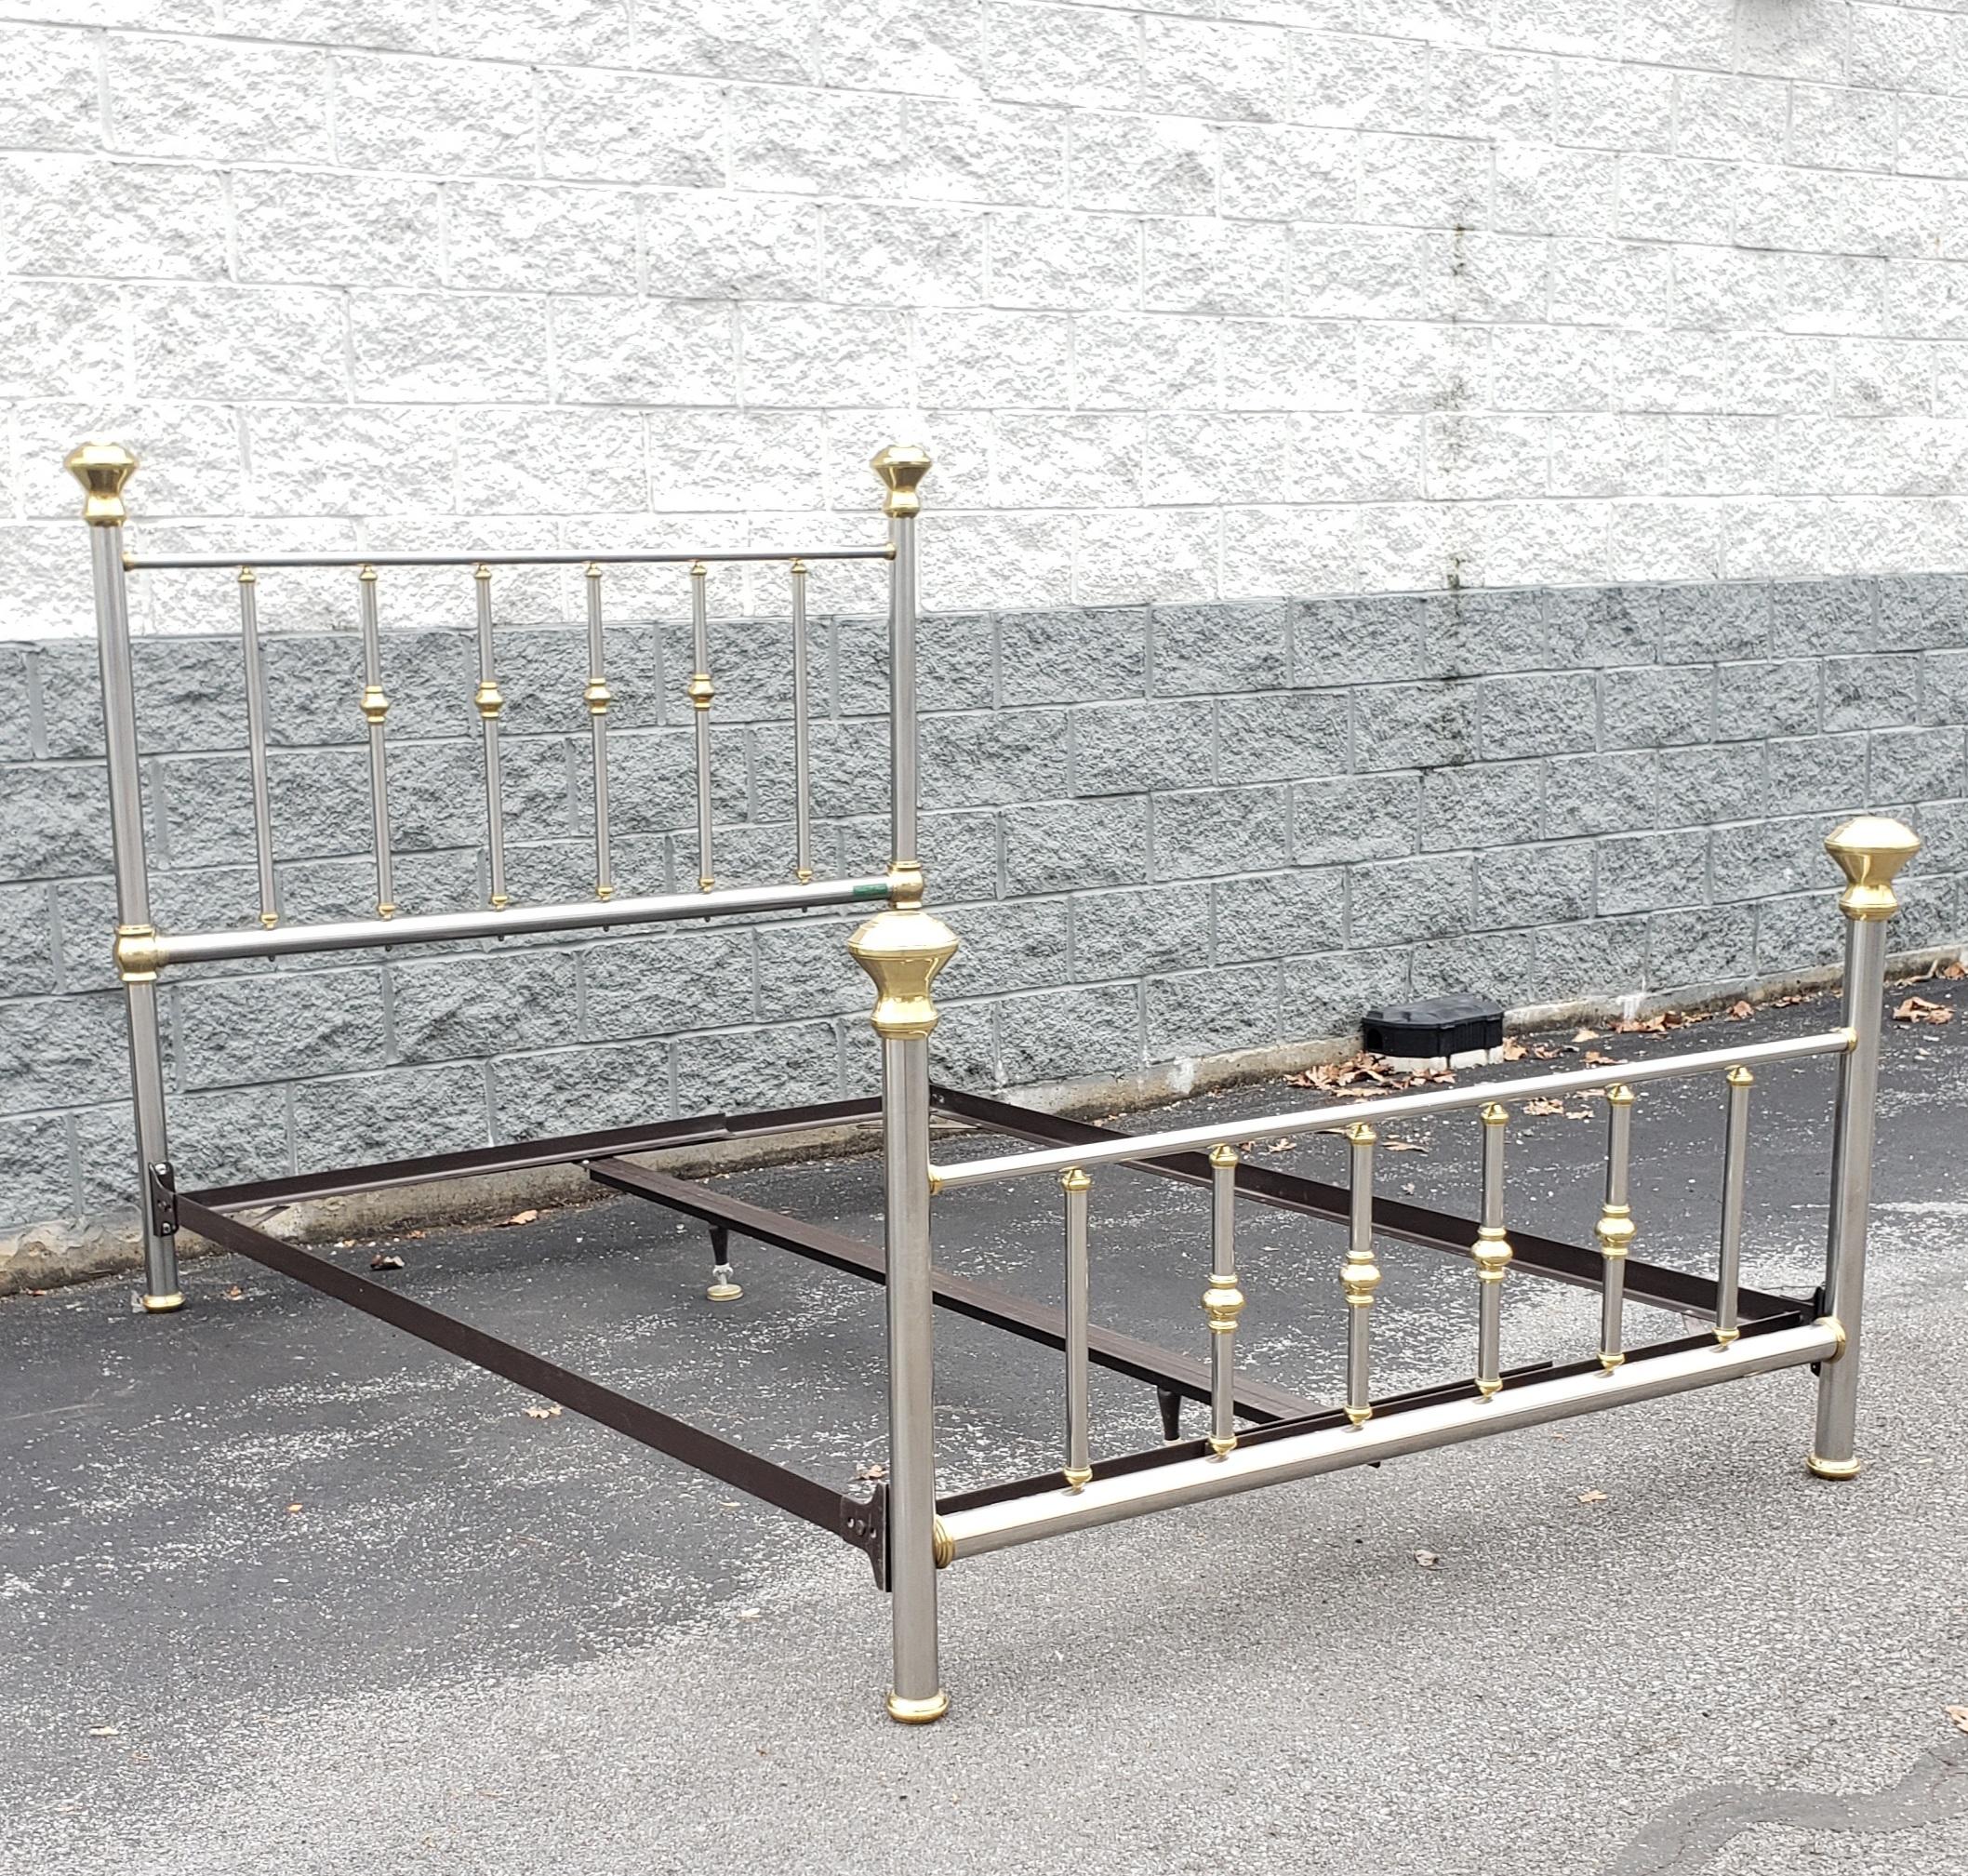 A magnificent Charles P. Rogers French polished aluminum and brass queen size bedstead in great vintage condition.
Very clean troughout. Comes with original iron frame and hardware. Bed measures 64